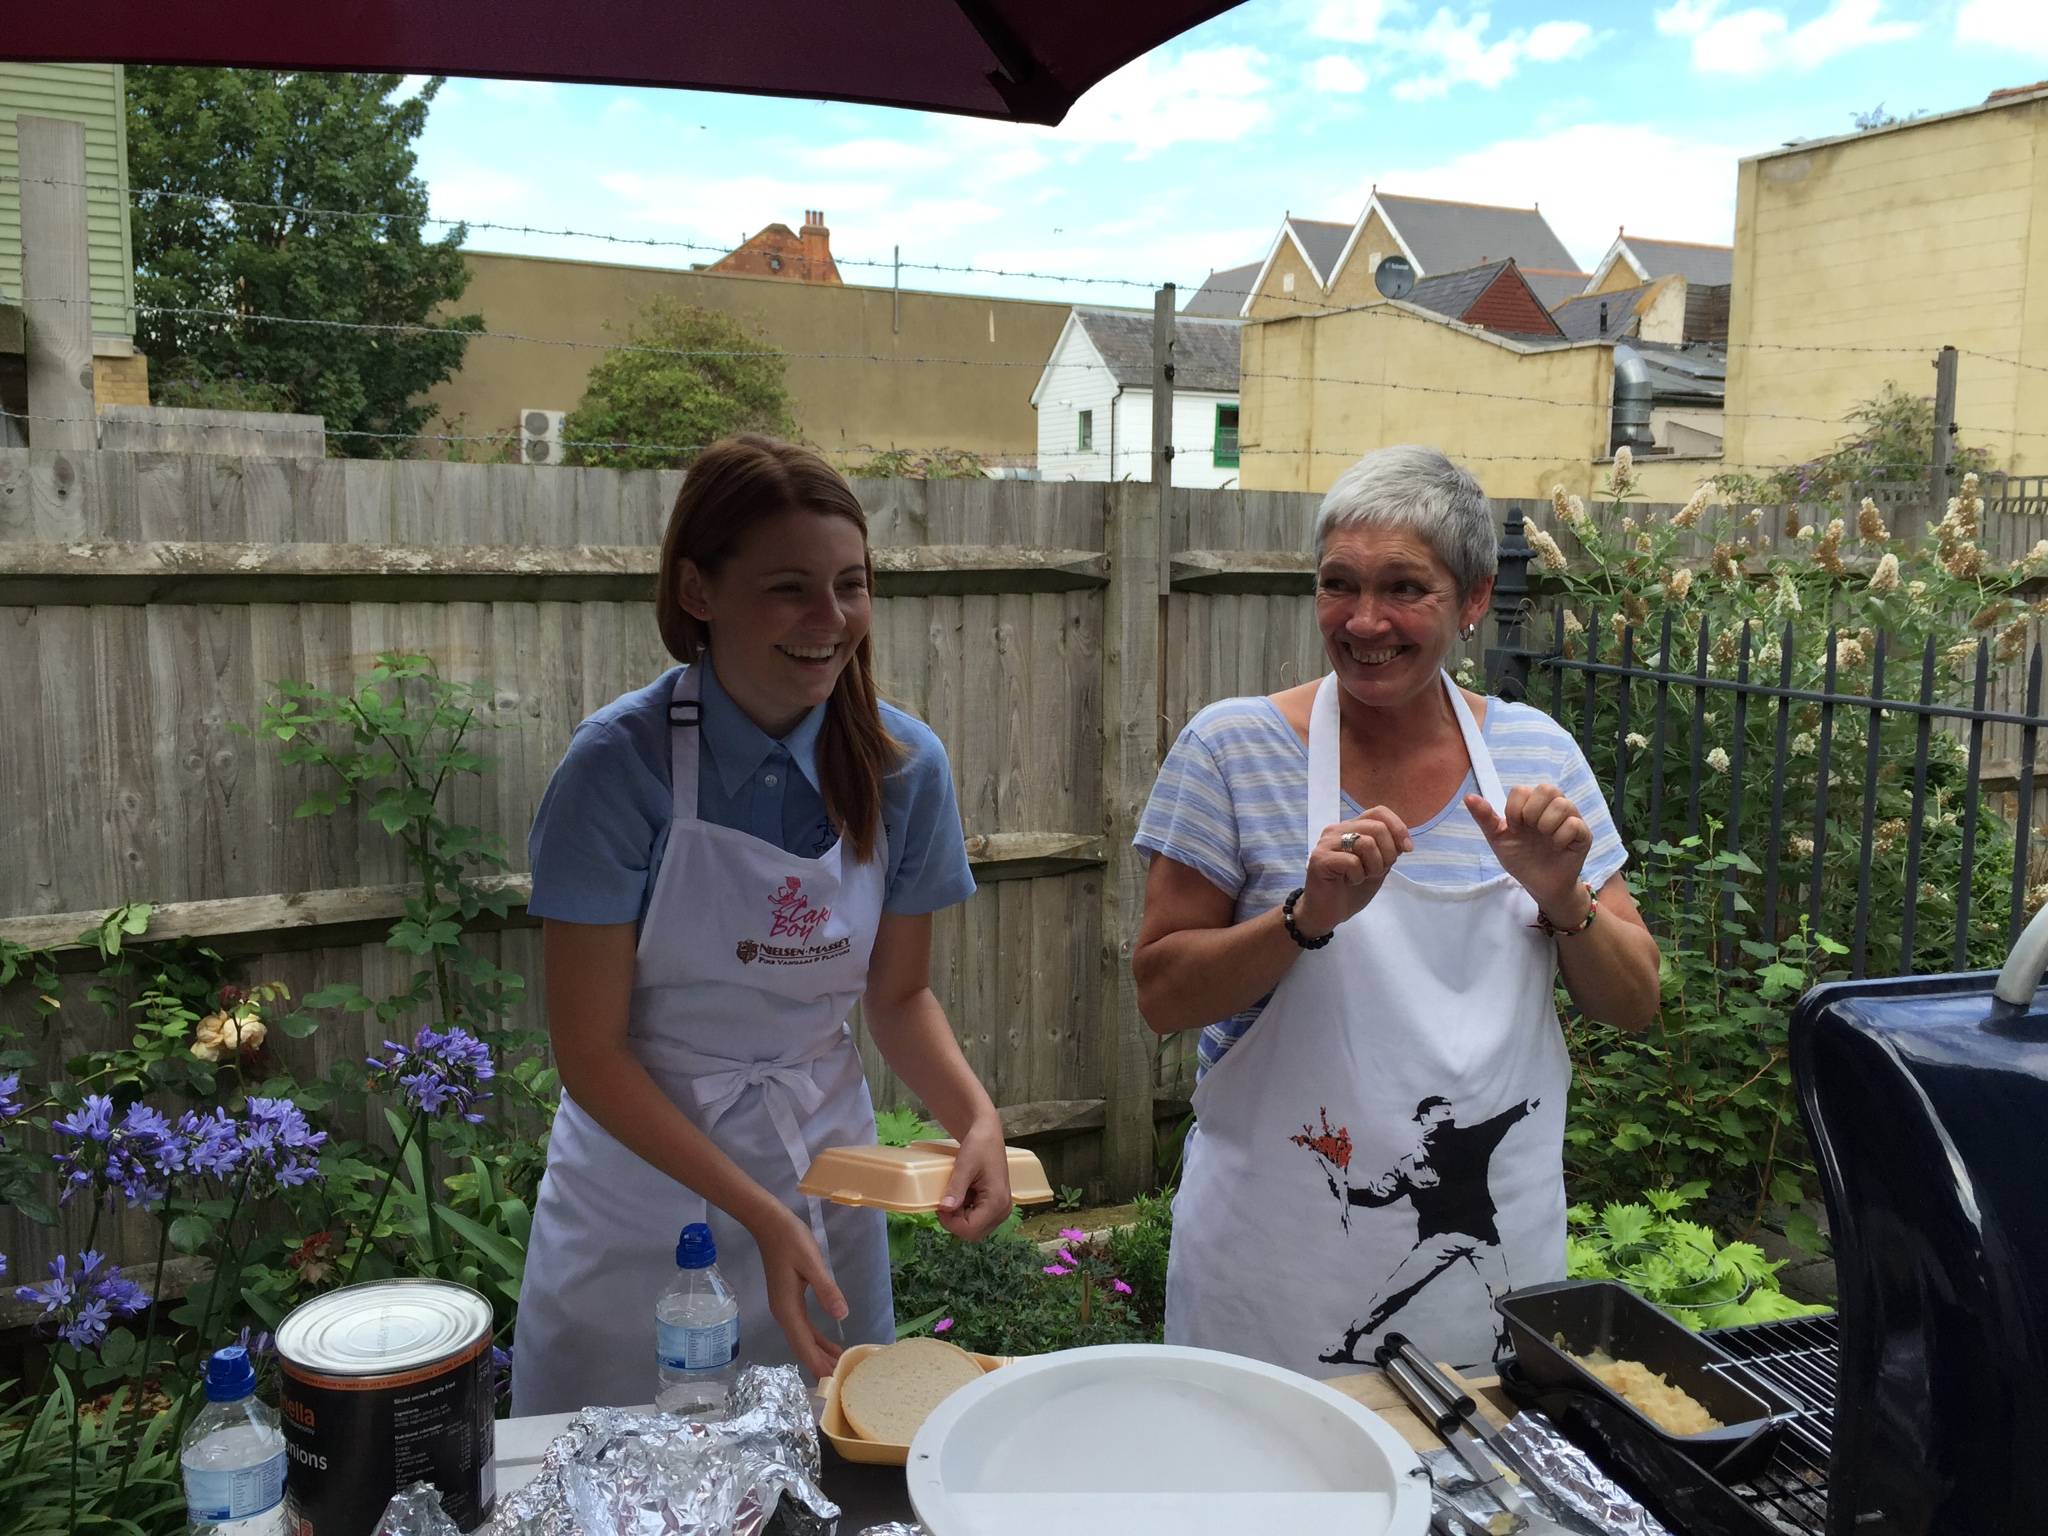 Kim and Marcia of Sharrocks - Barbecue chefs for the day